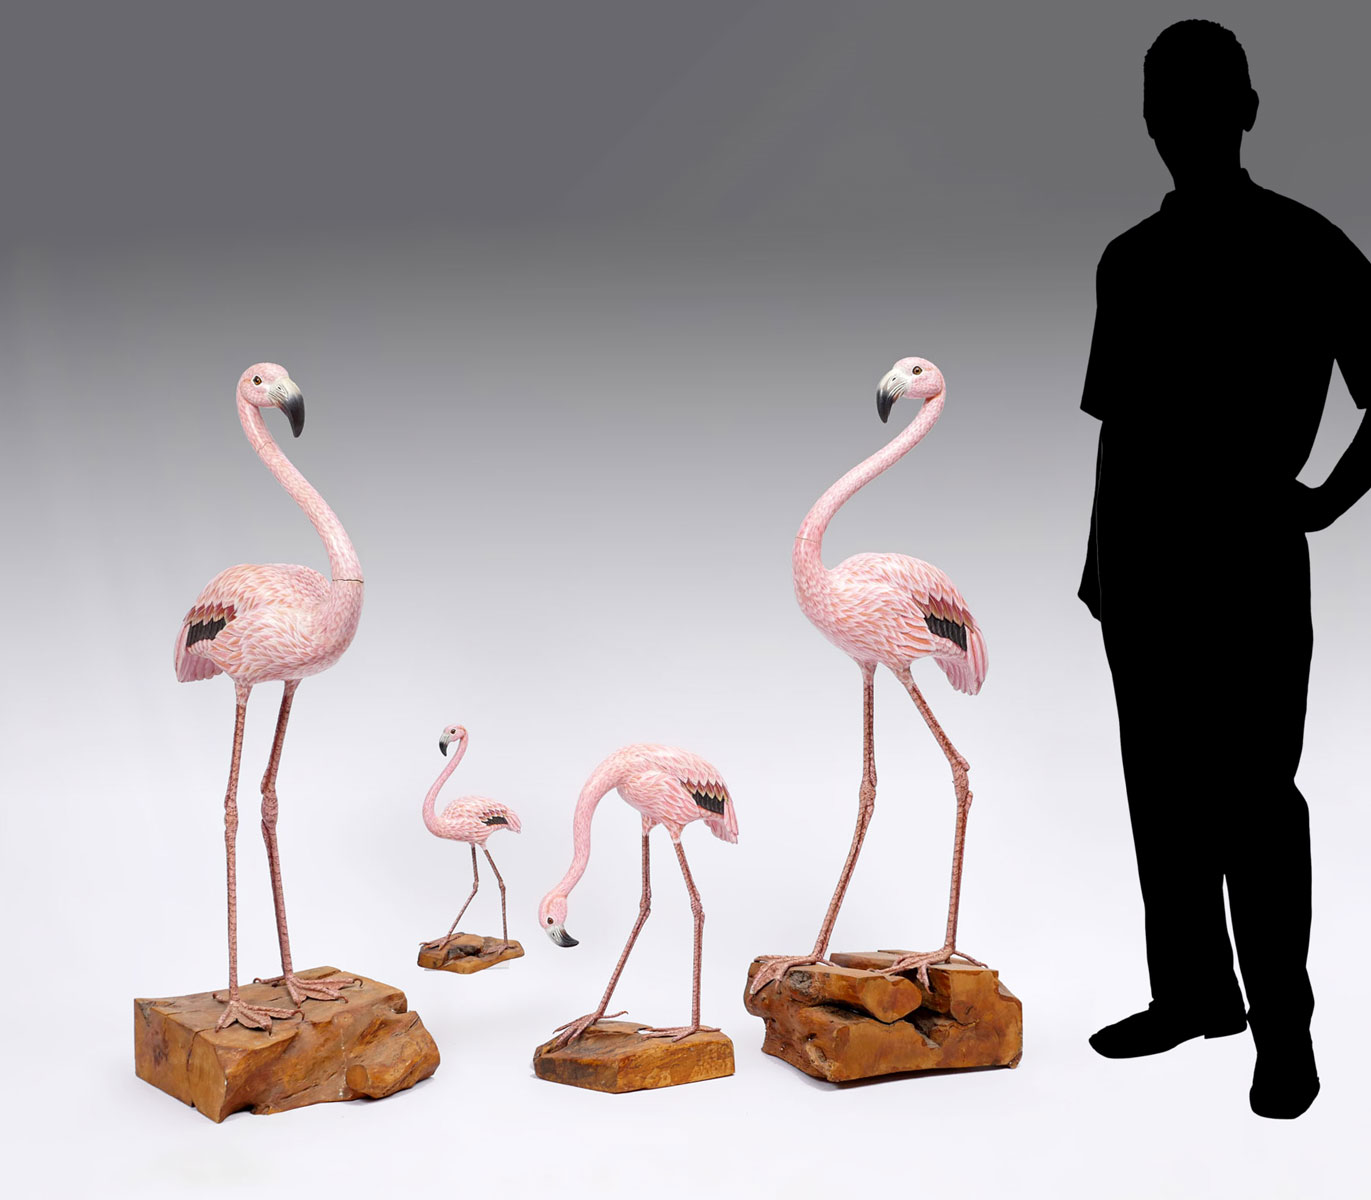 4 CARVED WOOD FLAMINGOS: 4 hand